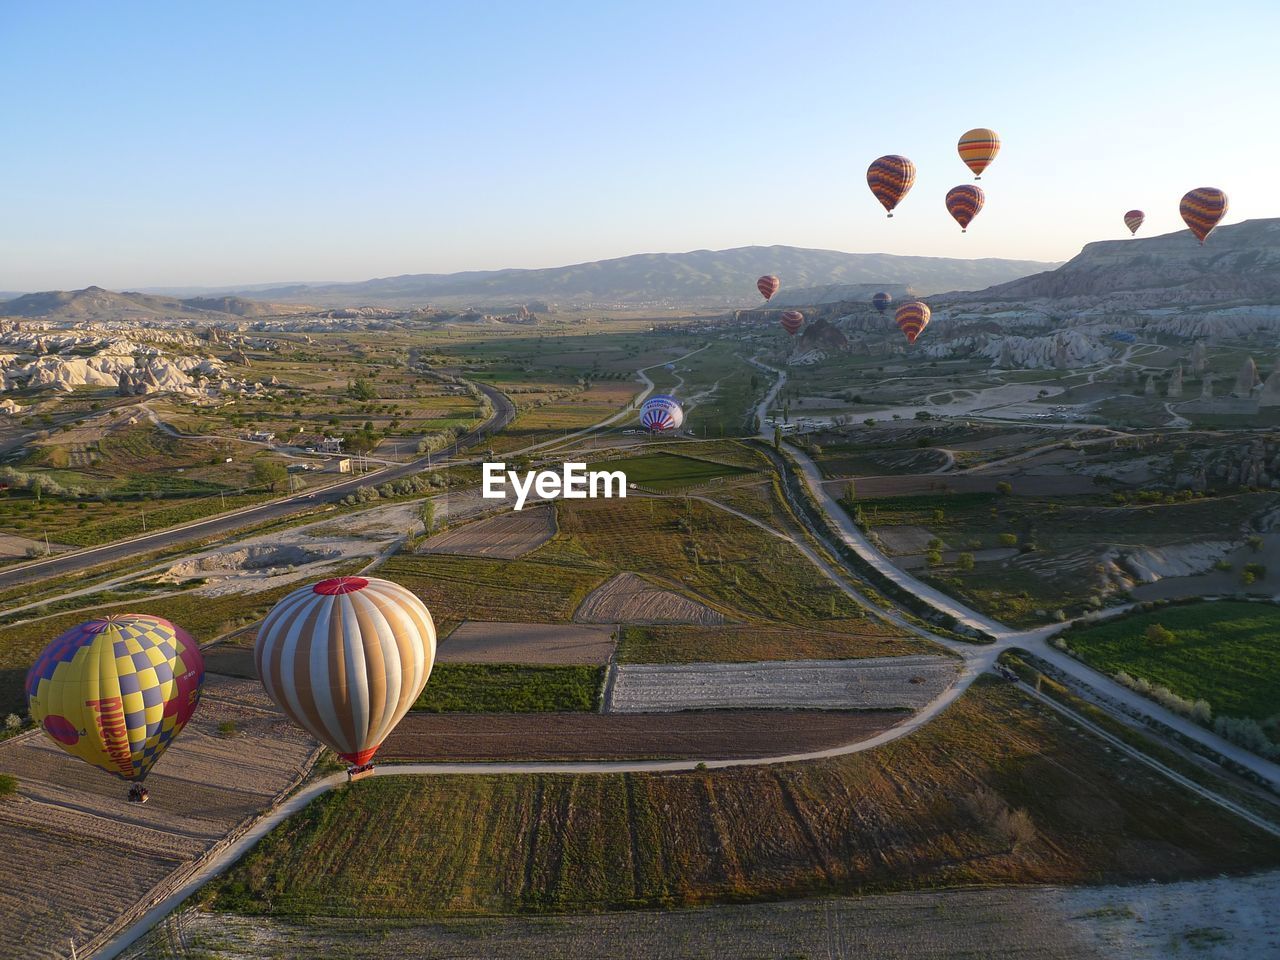 HOT AIR BALLOONS FLYING OVER LAND